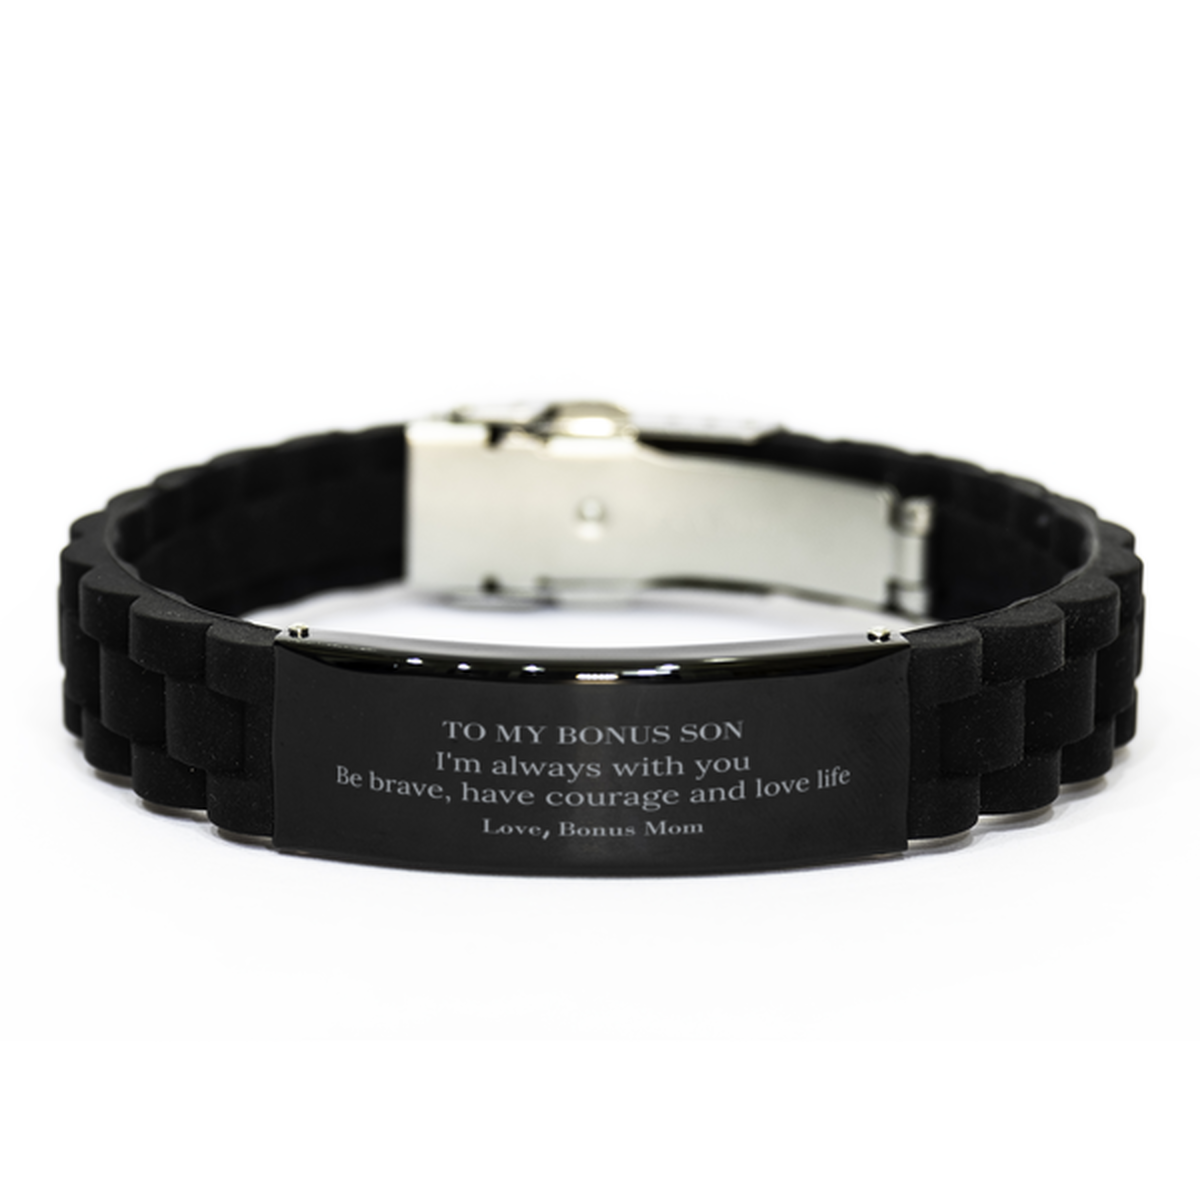 To My Bonus Son Gifts from Bonus Mom, Unique Black Glidelock Clasp Bracelet Inspirational Christmas Birthday Graduation Gifts for Bonus Son I'm always with you. Be brave, have courage and love life. Love, Bonus Mom